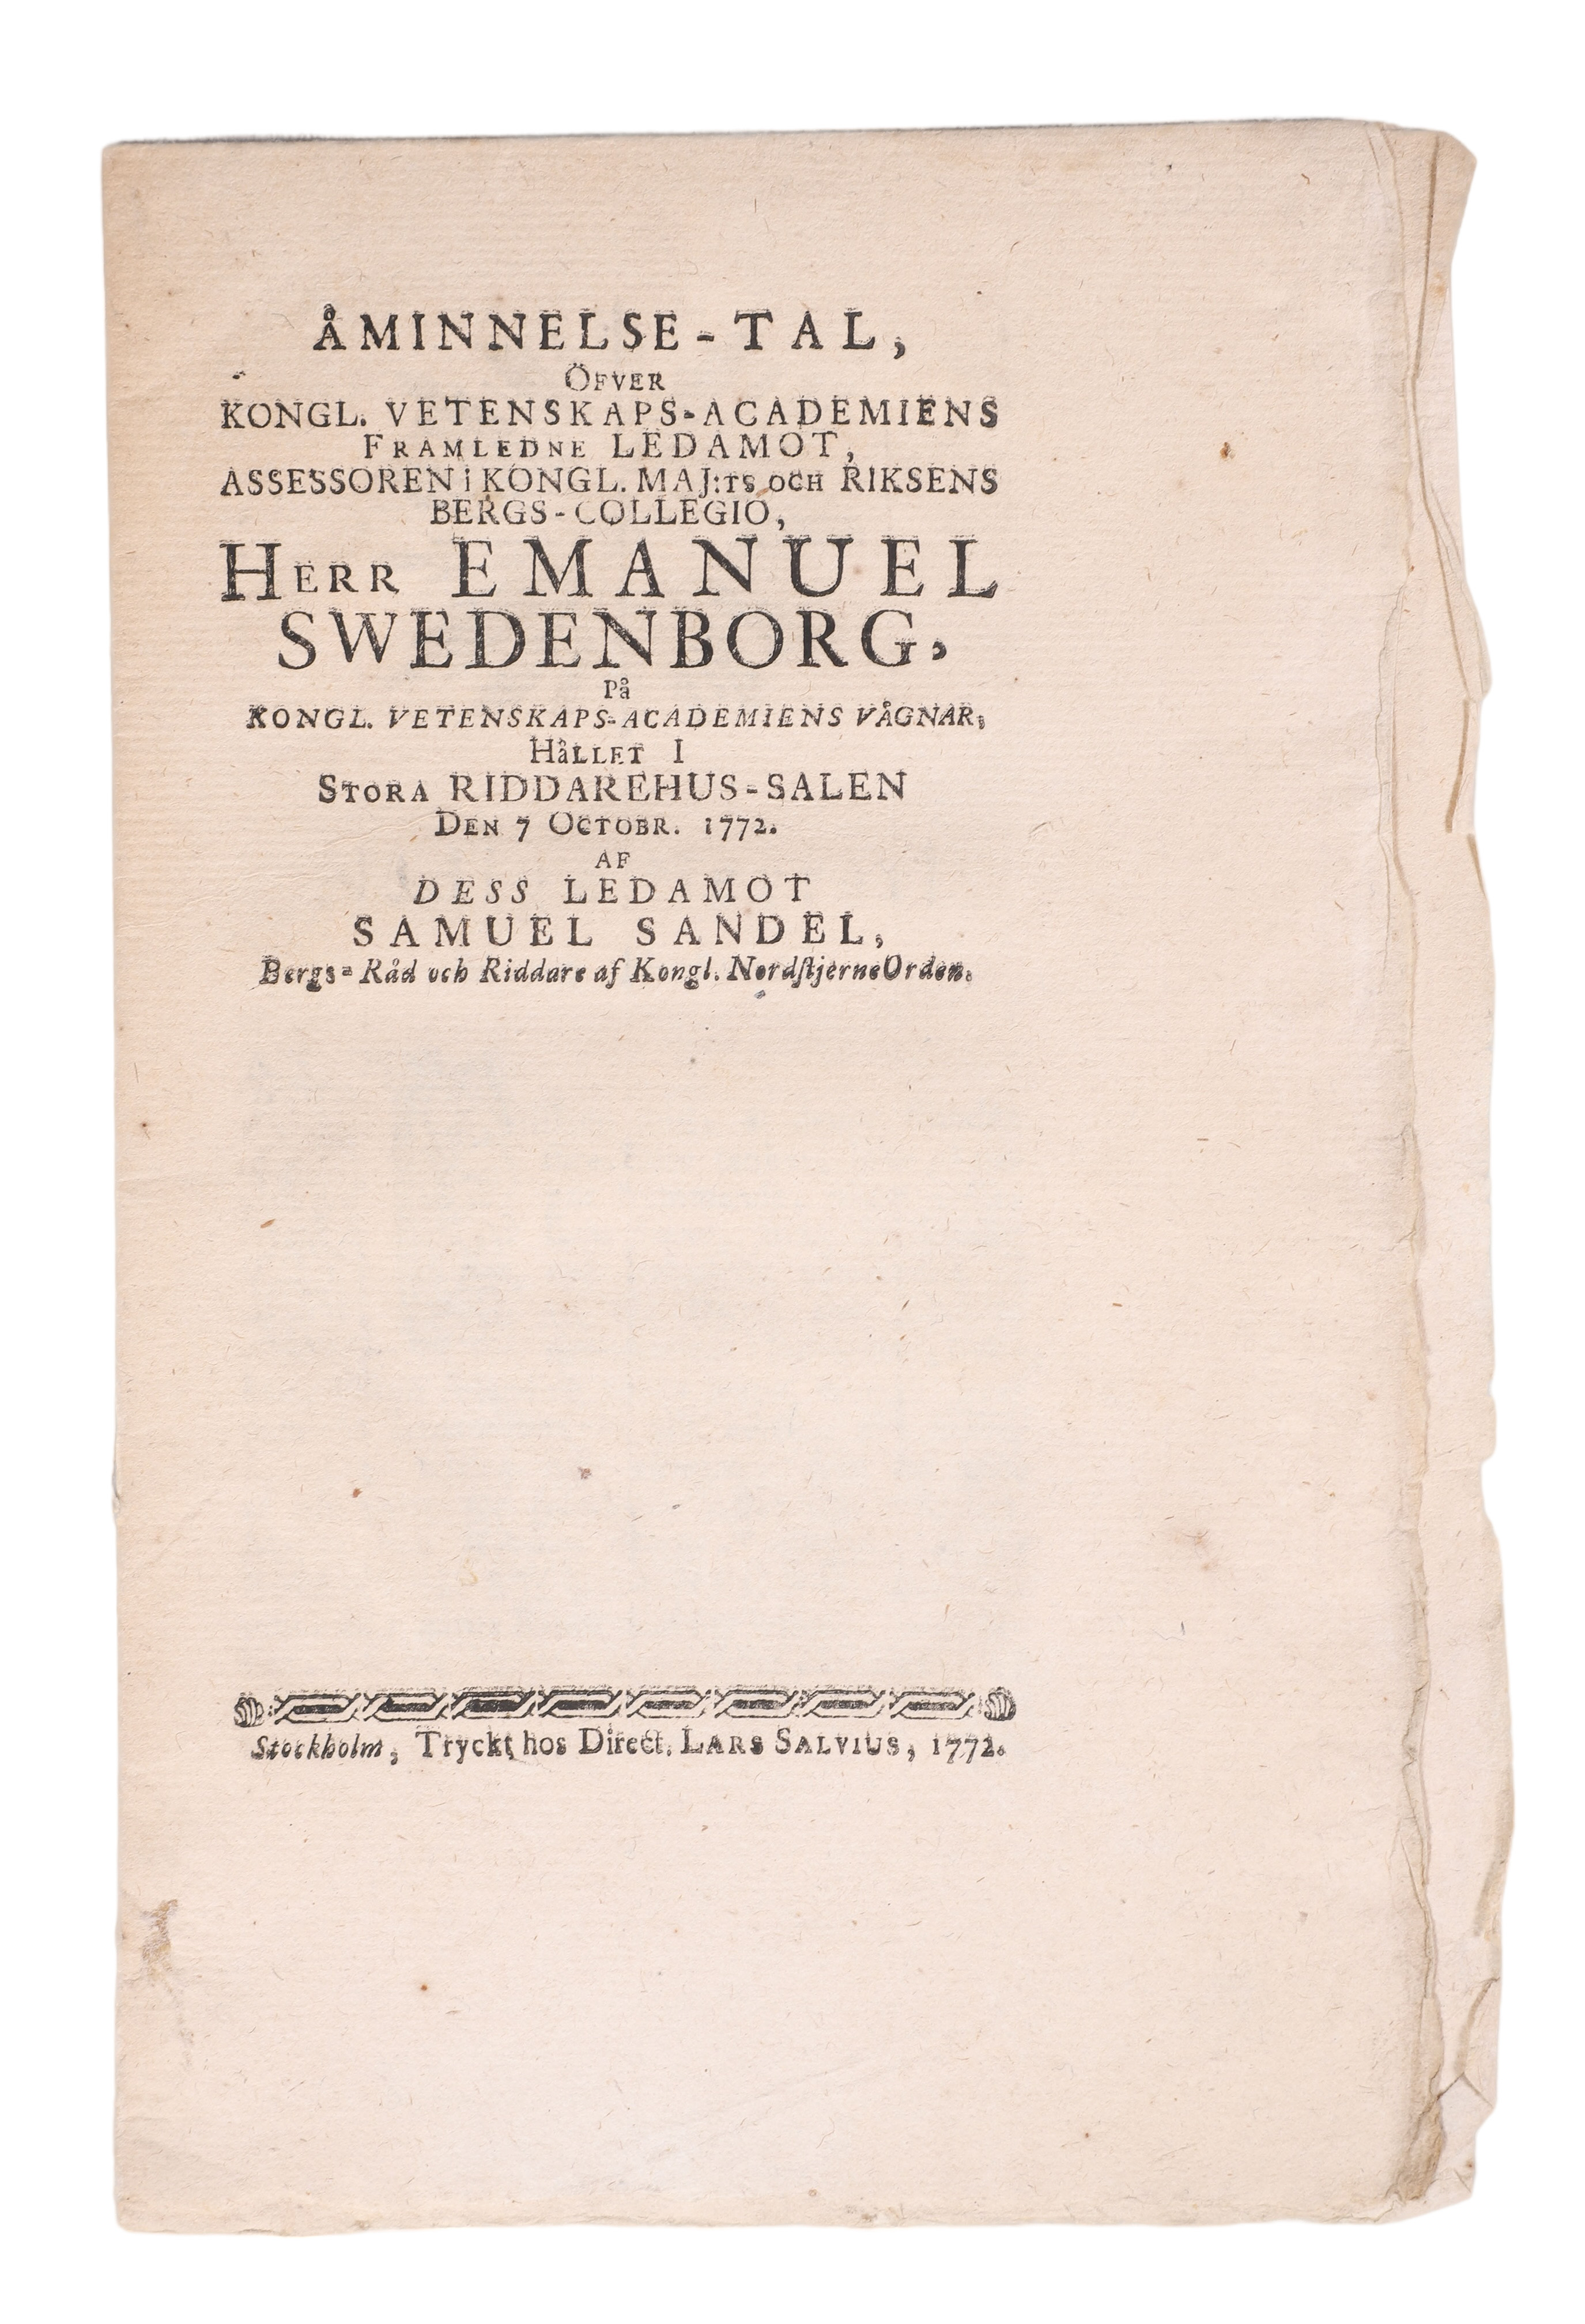 A pamphlet in Swedish by Samuel 2e1e9c